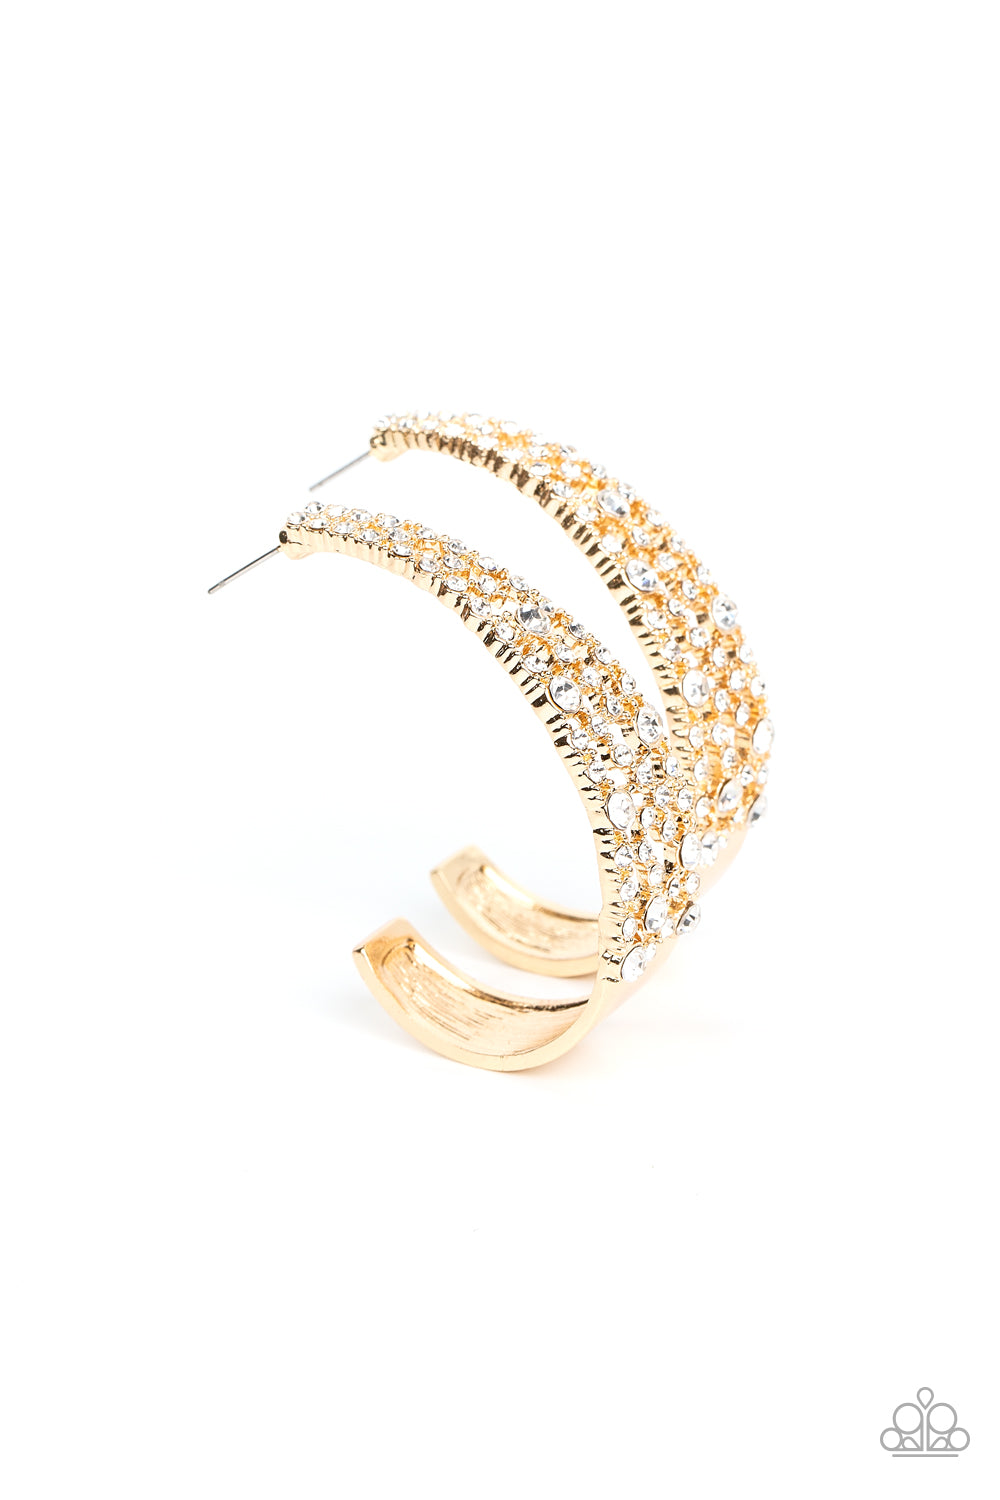 Cold as Ice Gold Hoop Earring - Paparazzi Accessories  Classic white rhinestones dot a golden backdrop of dainty white rhinestones that delicately curves into a solid gold J-hoop, resulting in a jaw-dropping dazzle. Earring attaches to a standard post fitting. Hoop measures approximately 1 1/2" in diameter.  Sold as one pair of hoop earrings.